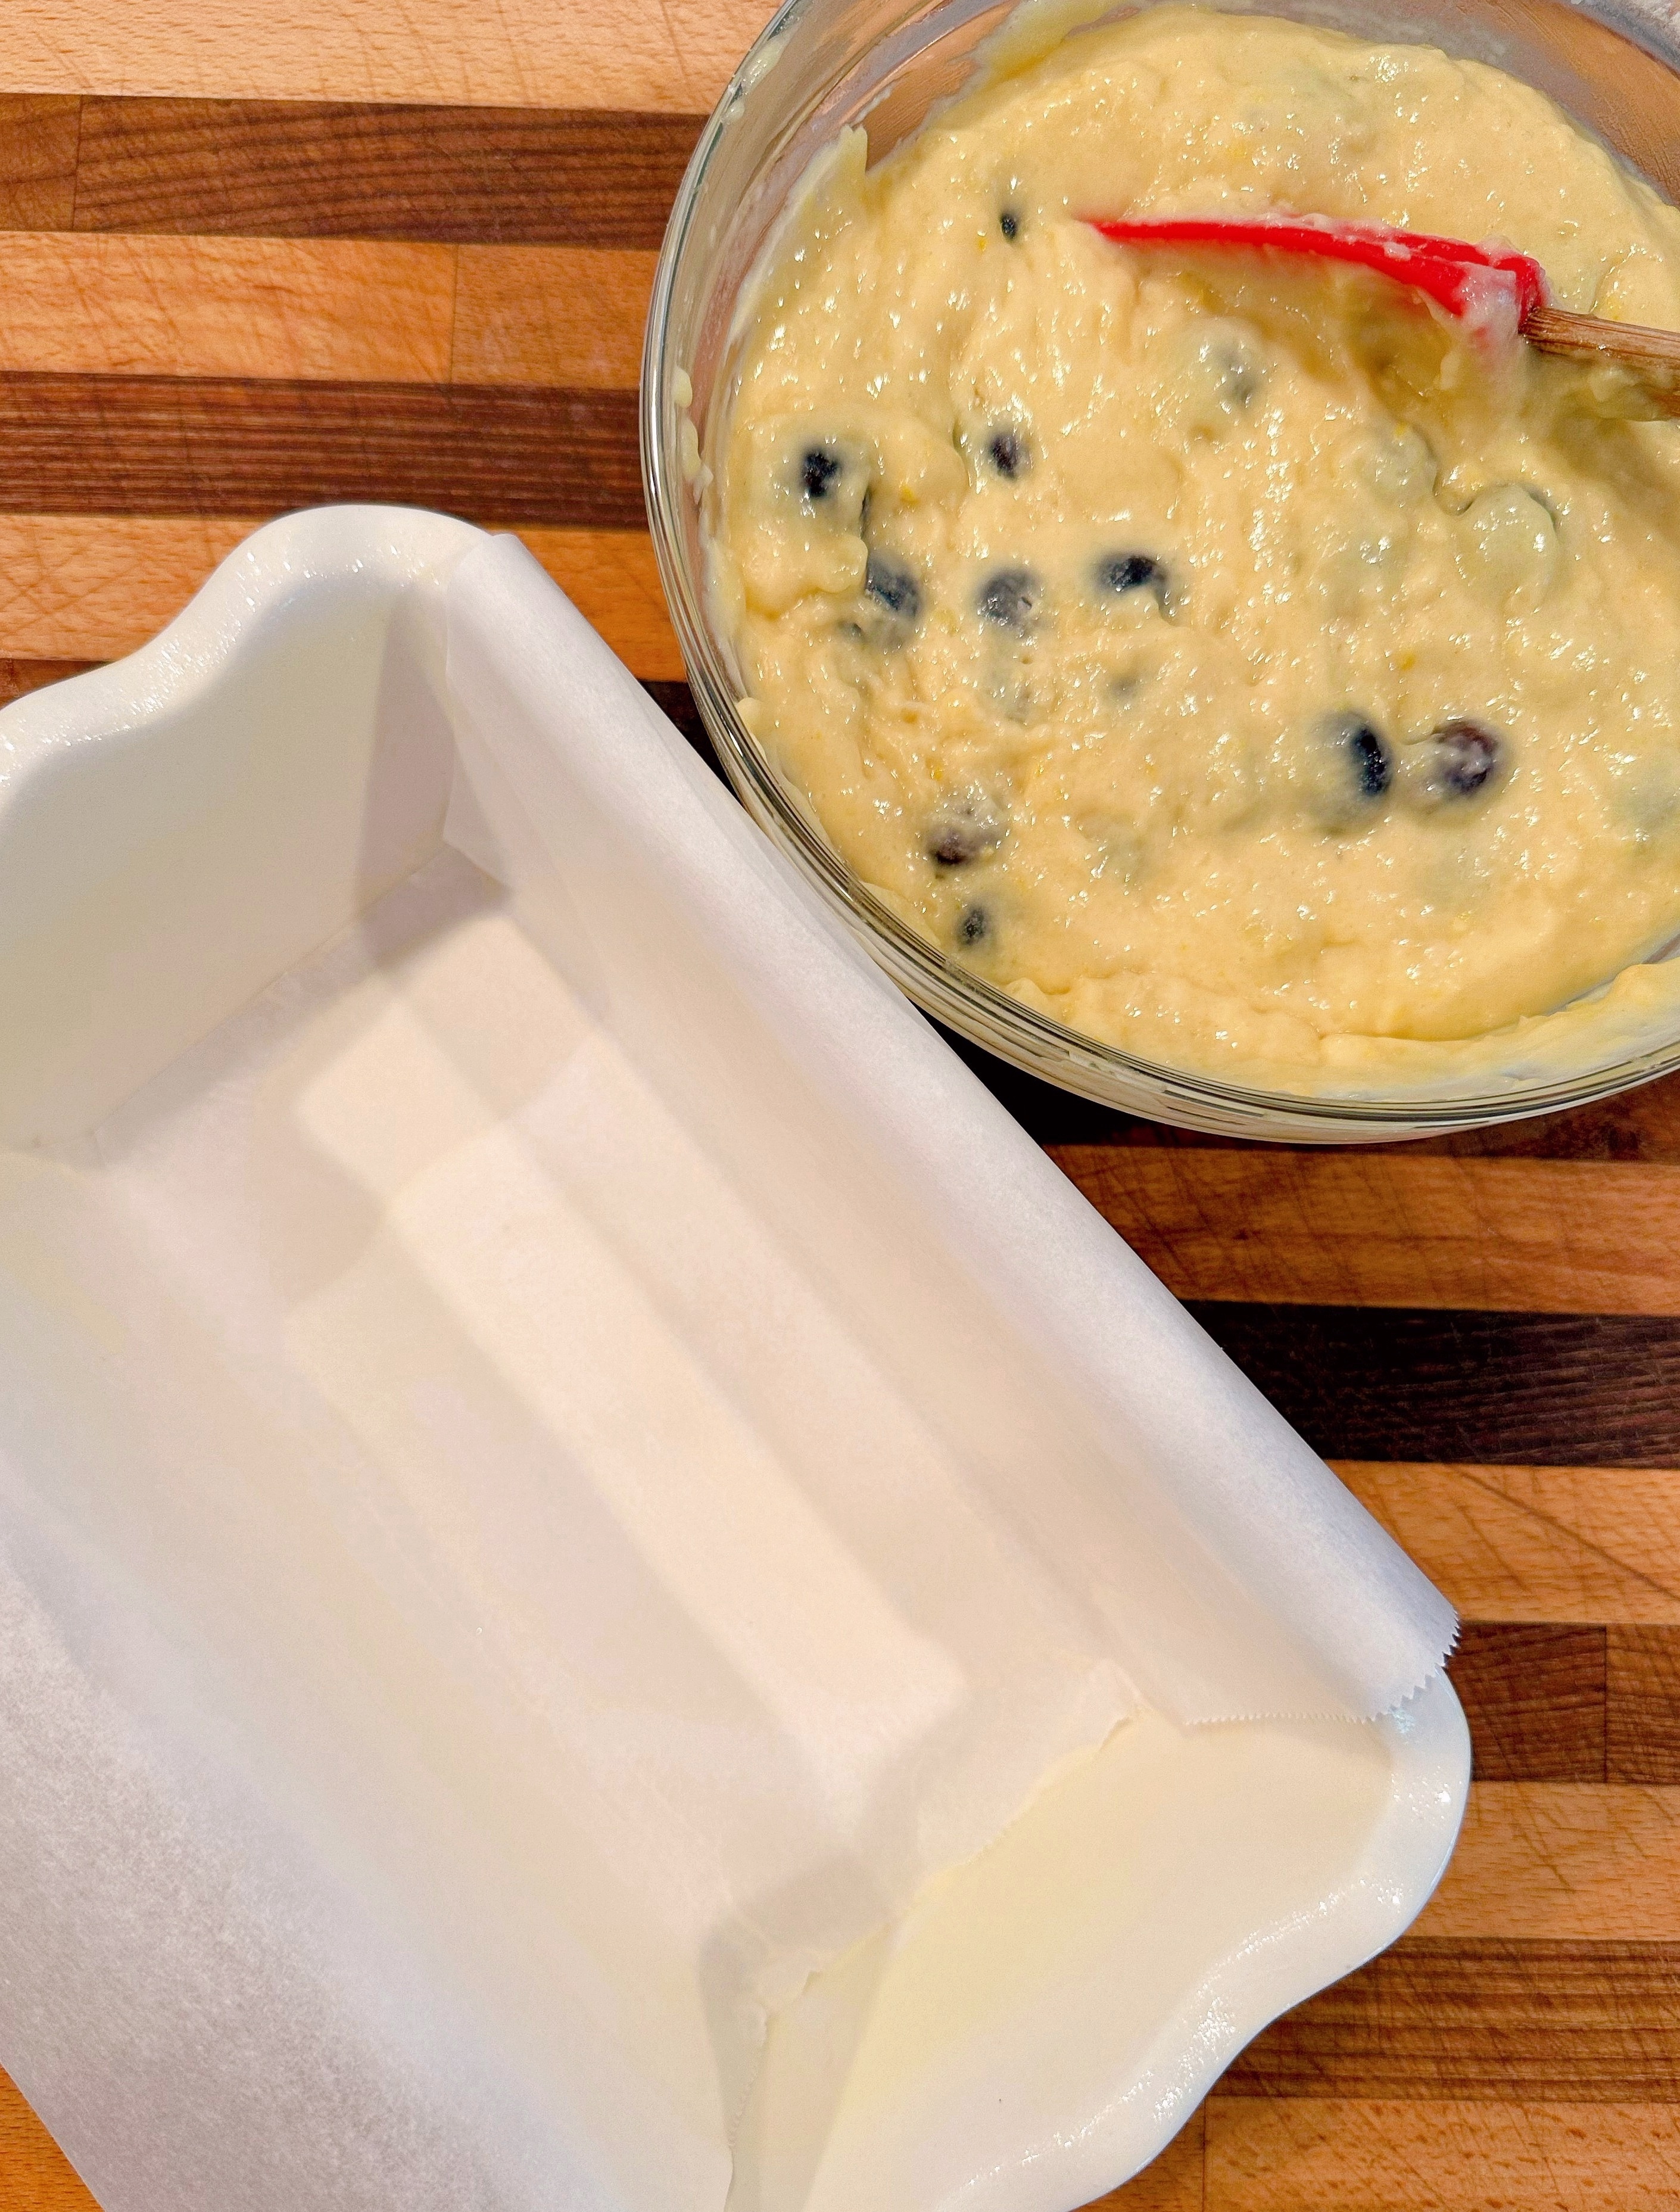 Prepared blueberry bread batter with prepared loaf baking dish.